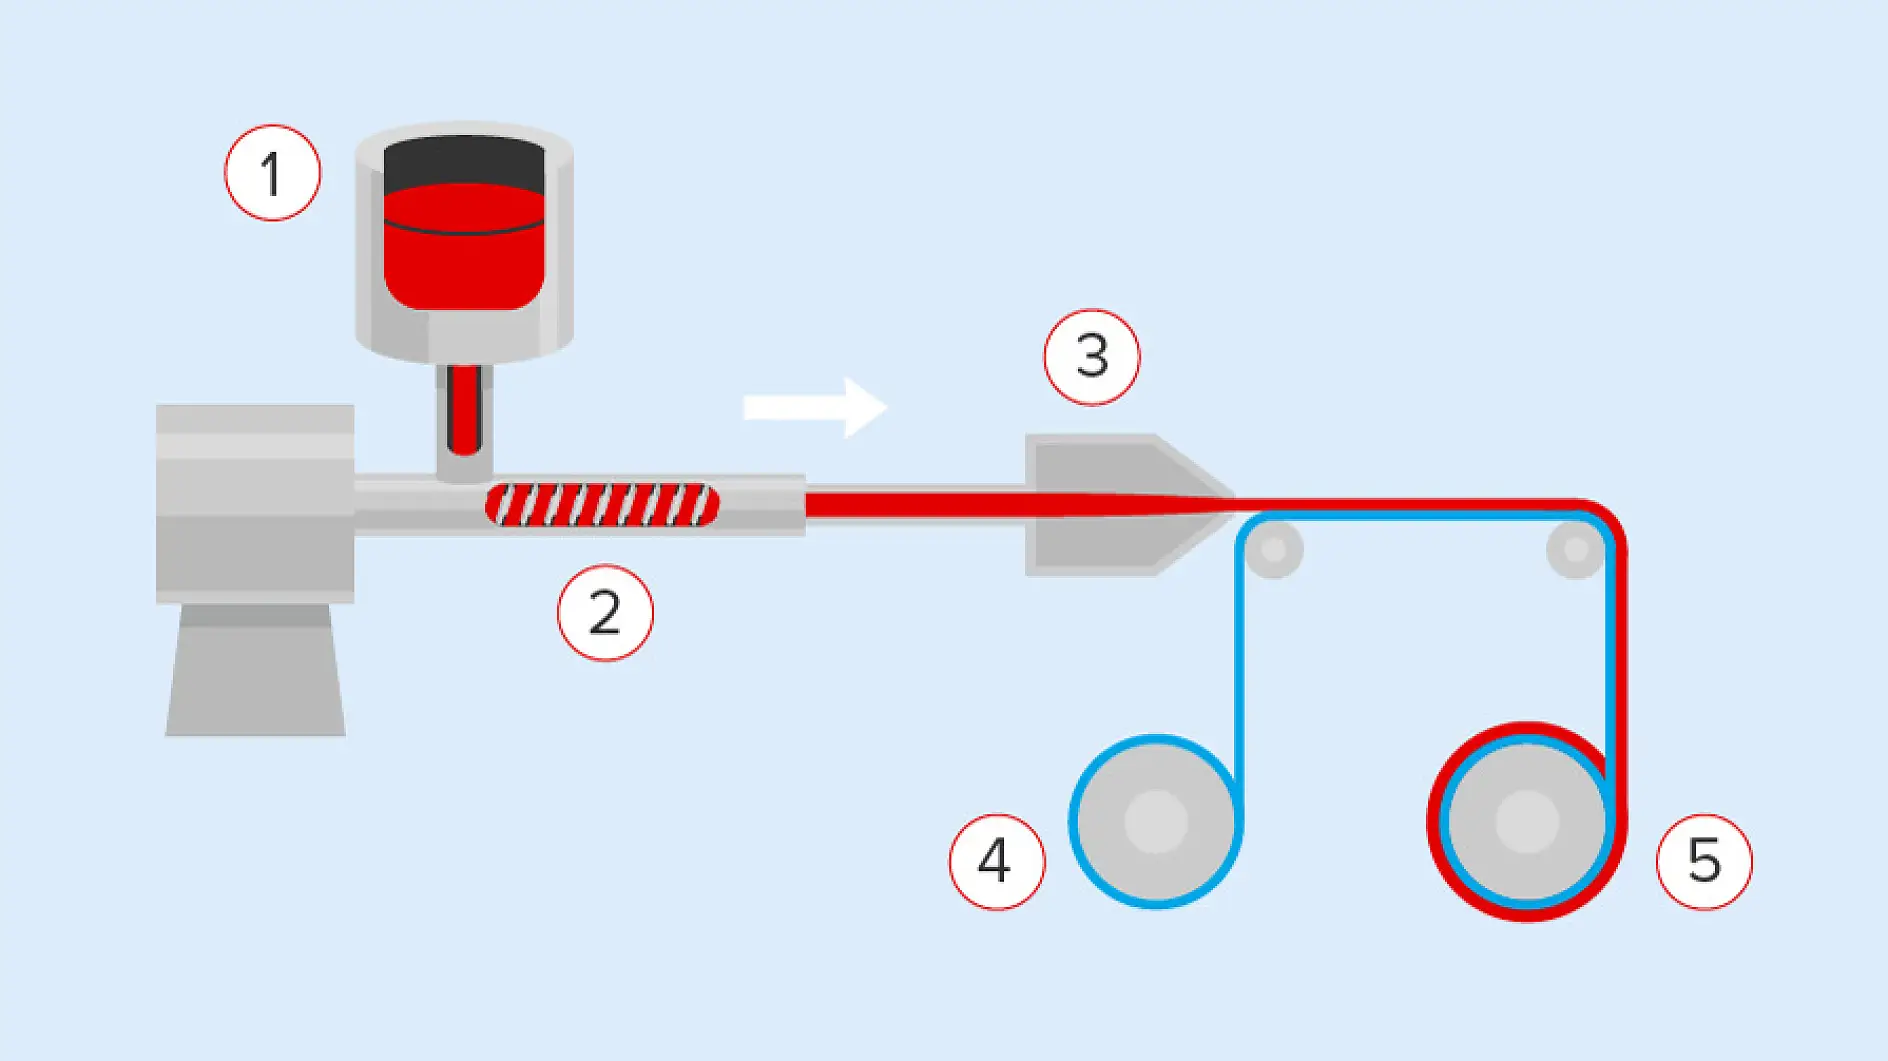 Acrylic adhesives can be coated in a "traditional" way with solvents (water or chemicals) or solvent-free like the process above describes: The ingedients are heated (1), mixed and crosslinked in a spacial extruding process (2) and afterwards directly coated (3) on the backing (4). Finally the web is winded and cut to rolls (5).